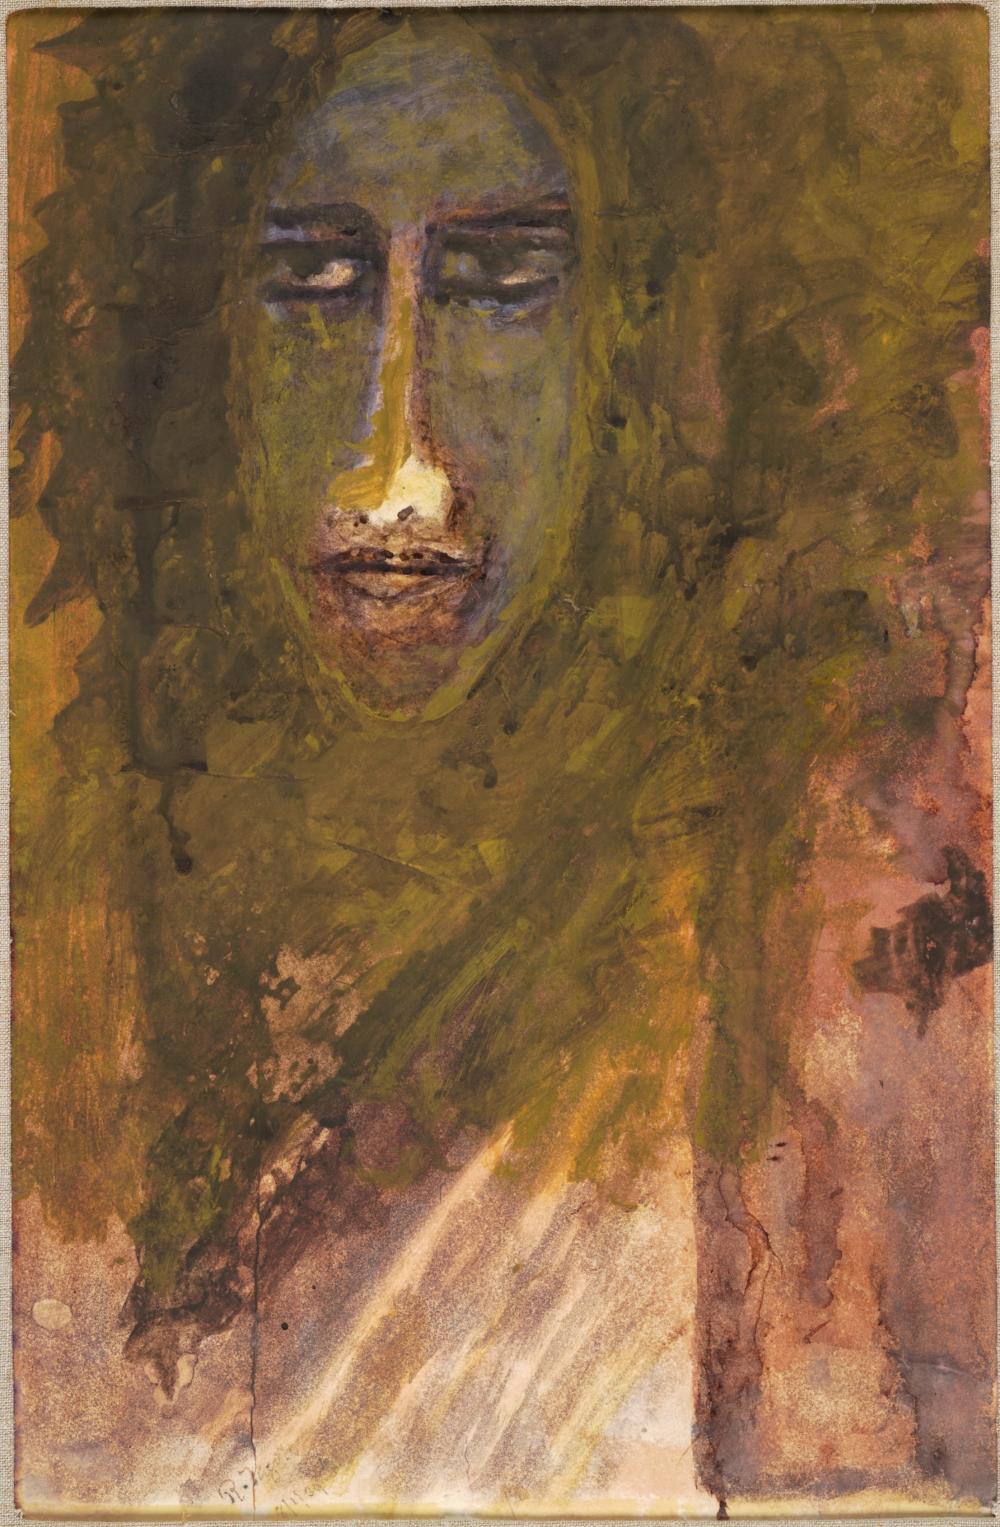 watercolour of a face by Rabindranath Tagore